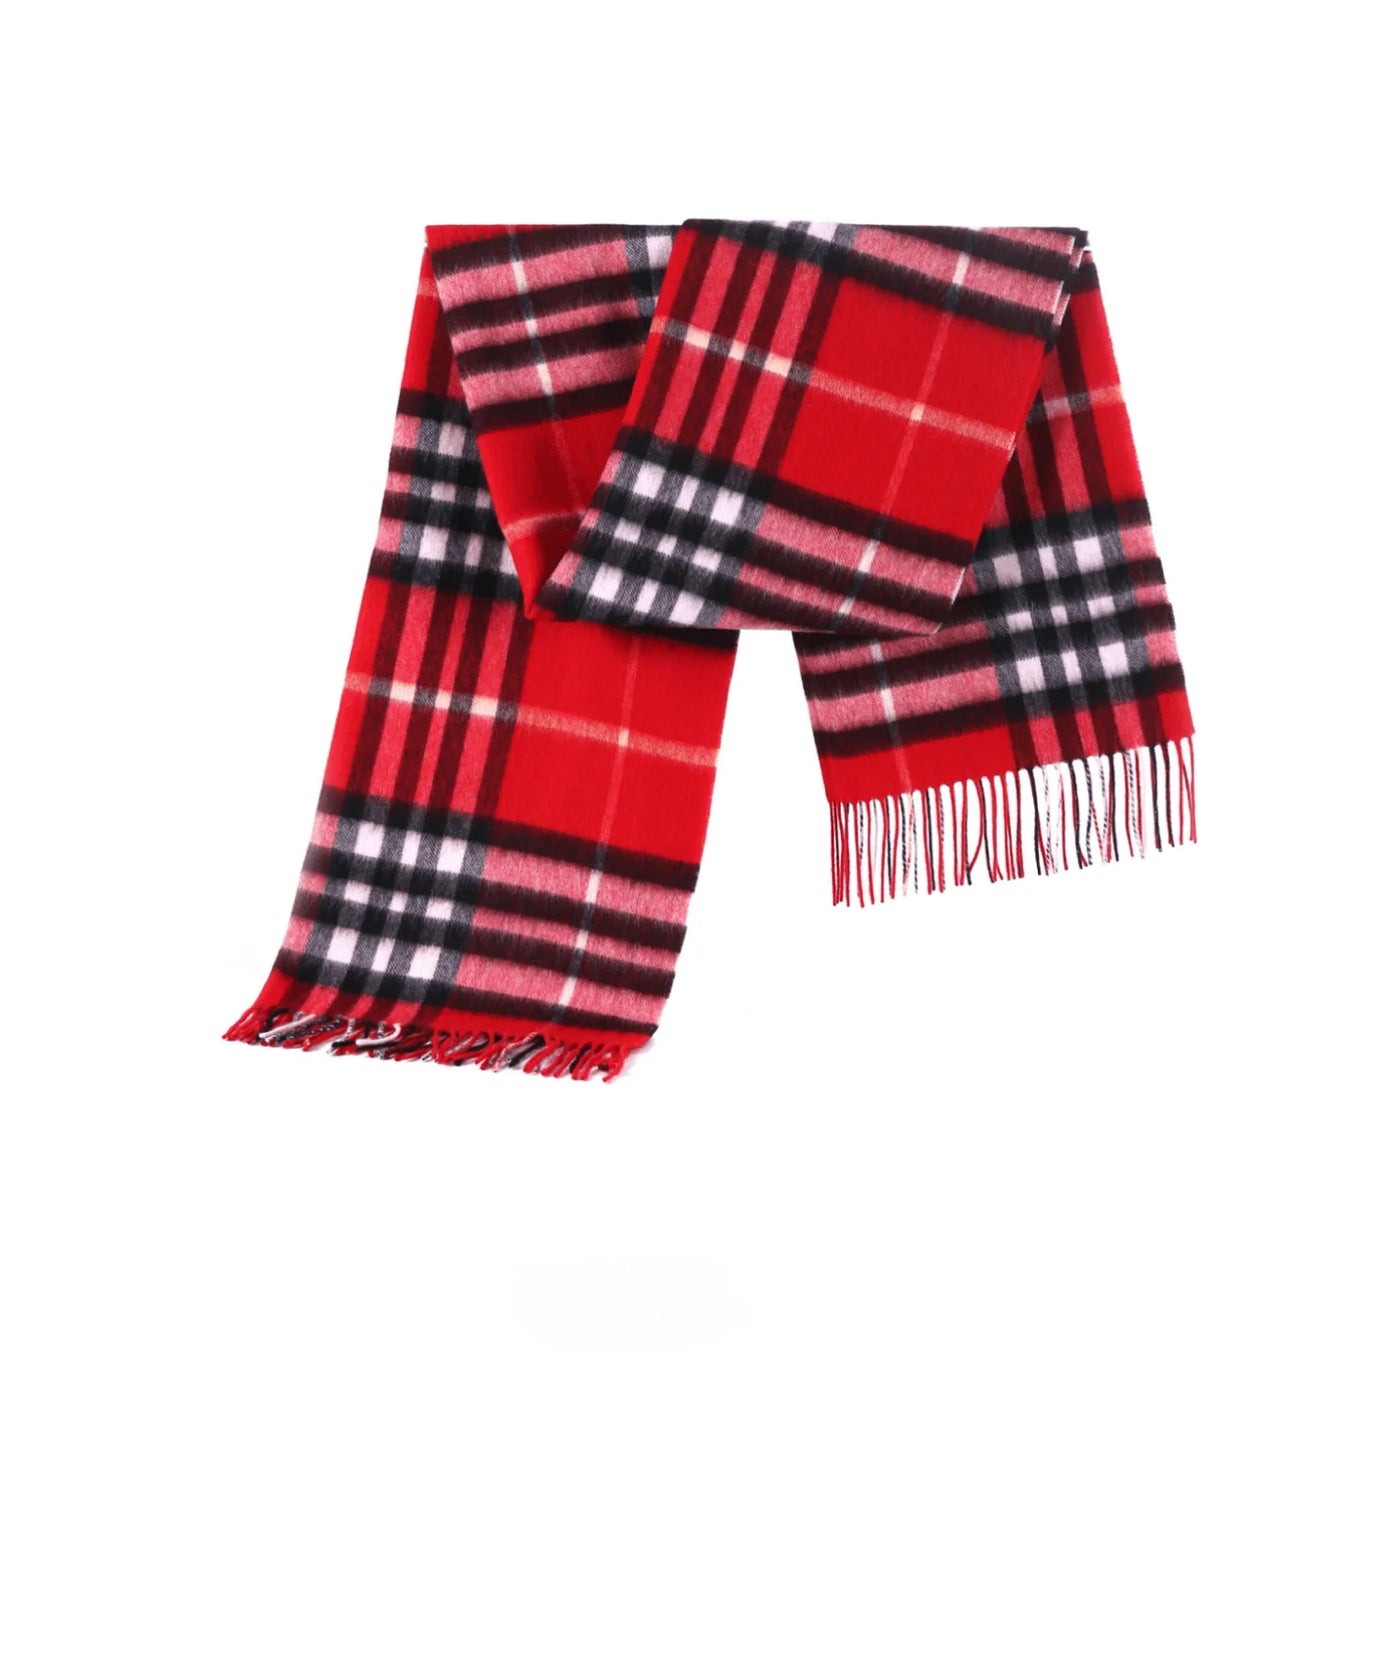 Blanket 100% Pure wool Throws Exclusive Iconic Design DC Classic